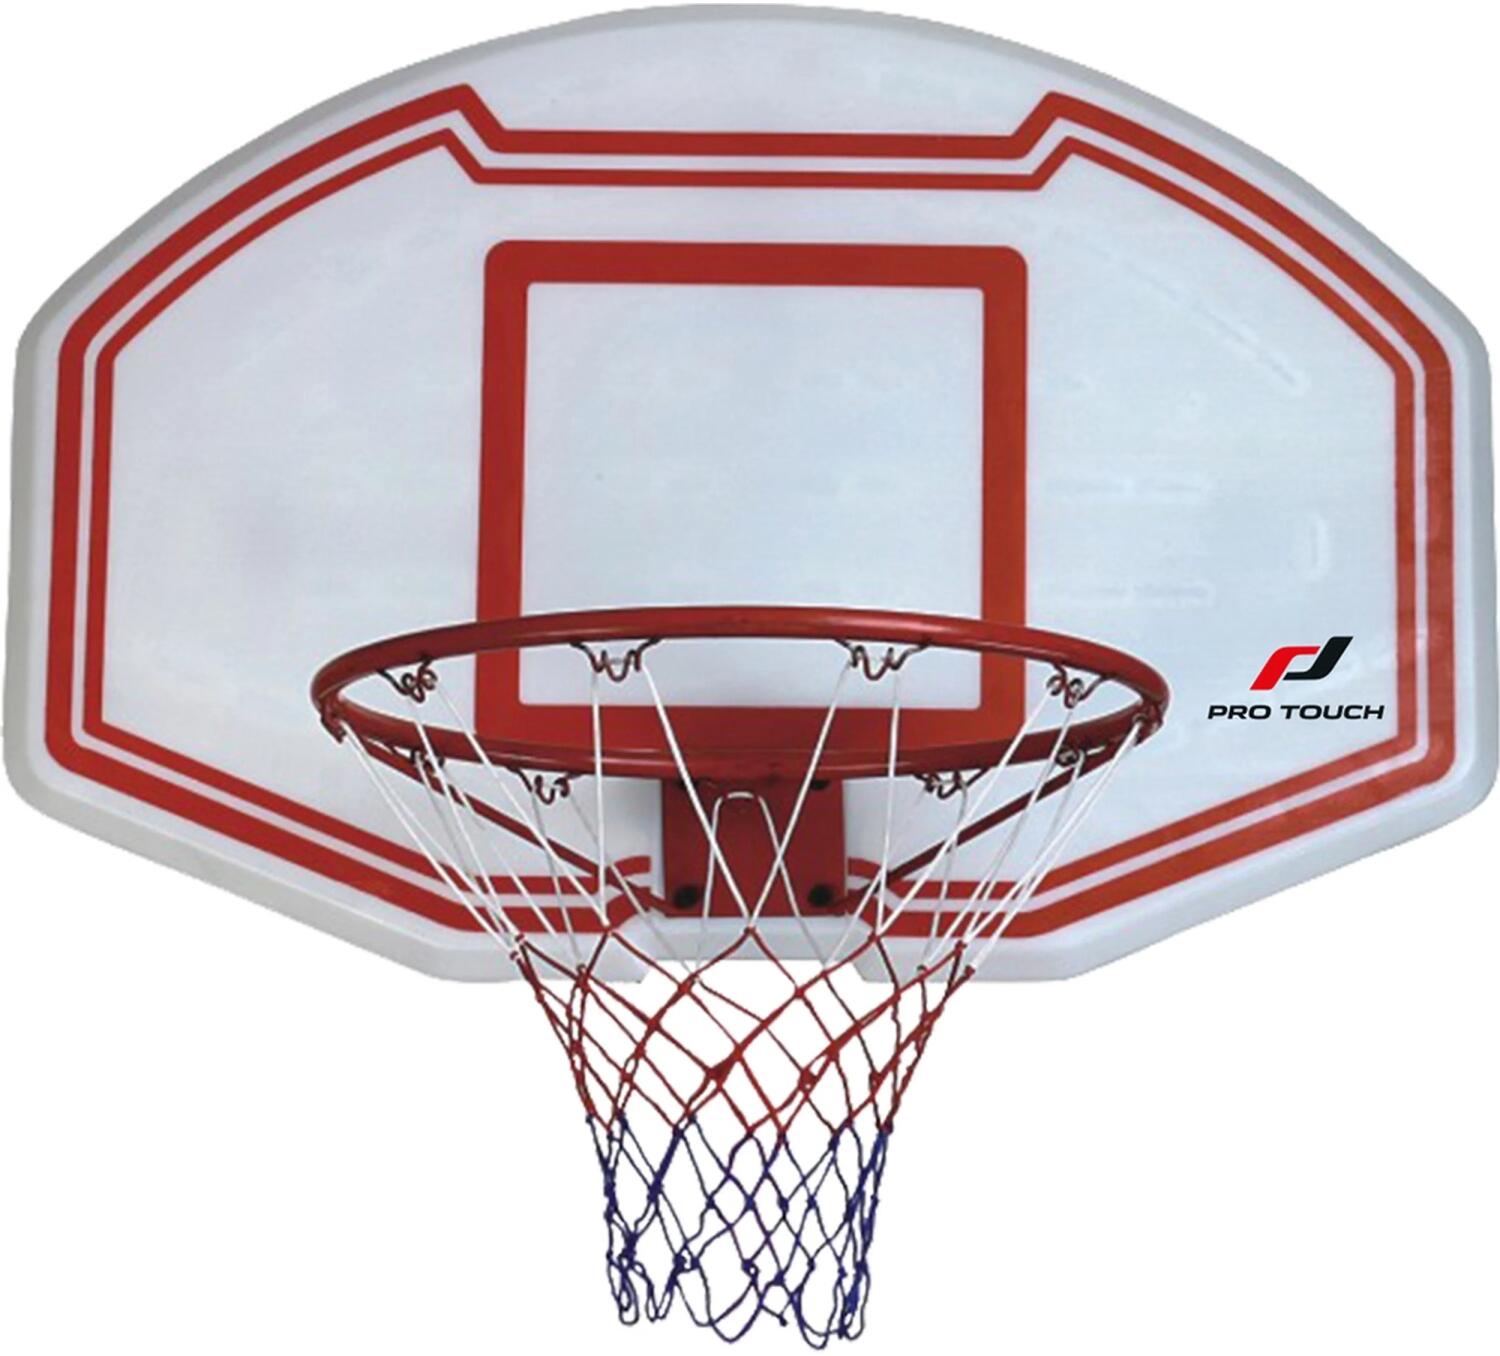 Pro Touch Basketball Board Harlem (001 multicolor) von Pro Touch